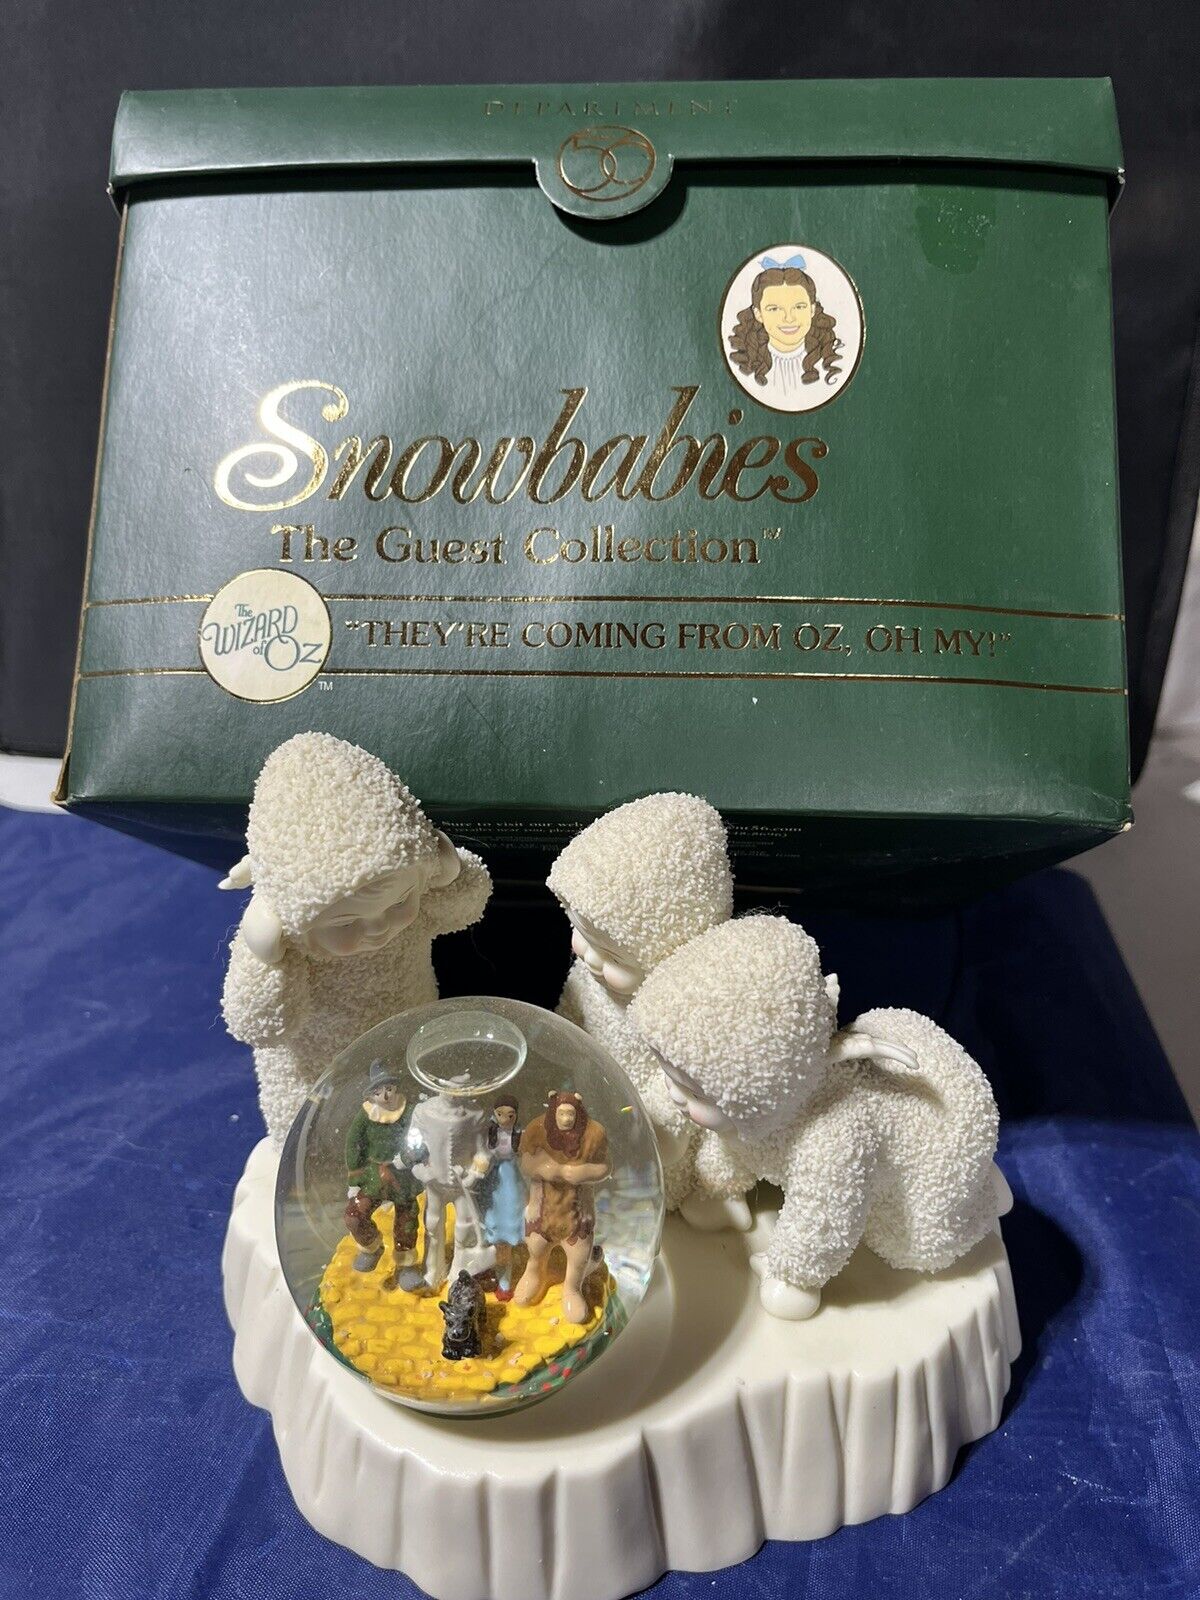 Snowbabies Wizard of Oz Snowglobe They're Coming From Oz Department 56 WB 2008